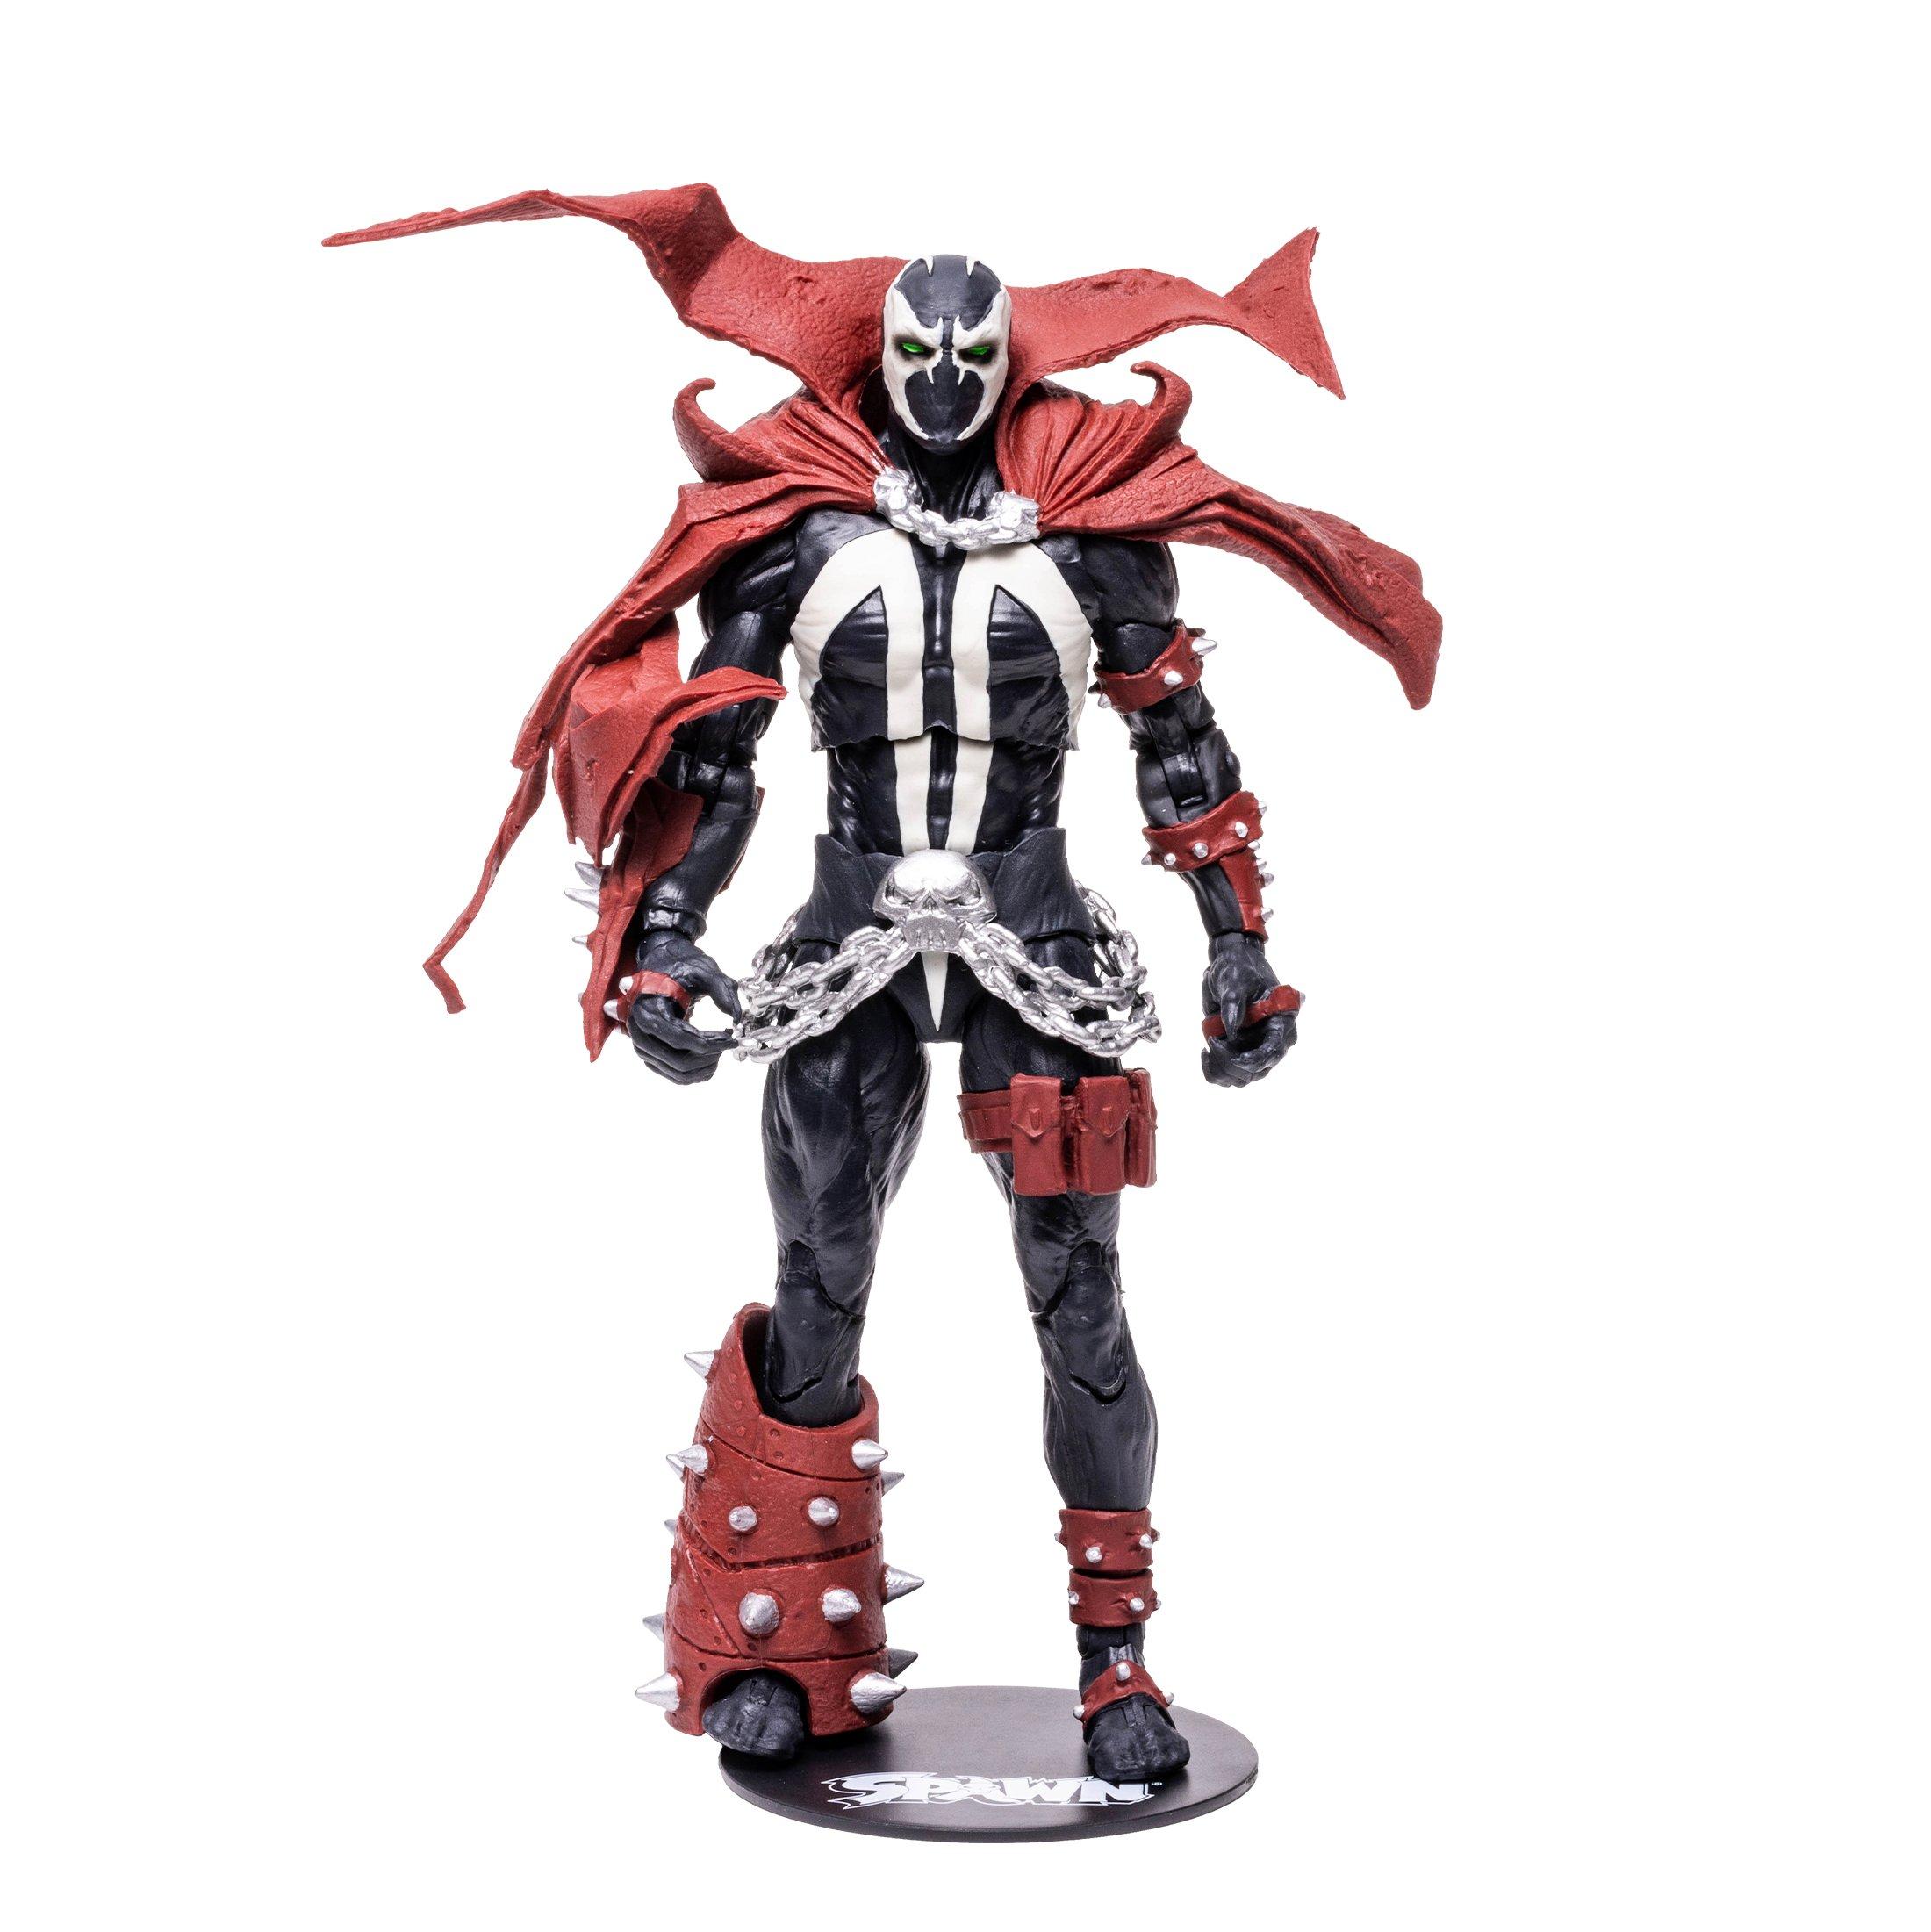 McFarlane Toys Spawn Action Figure for sale online